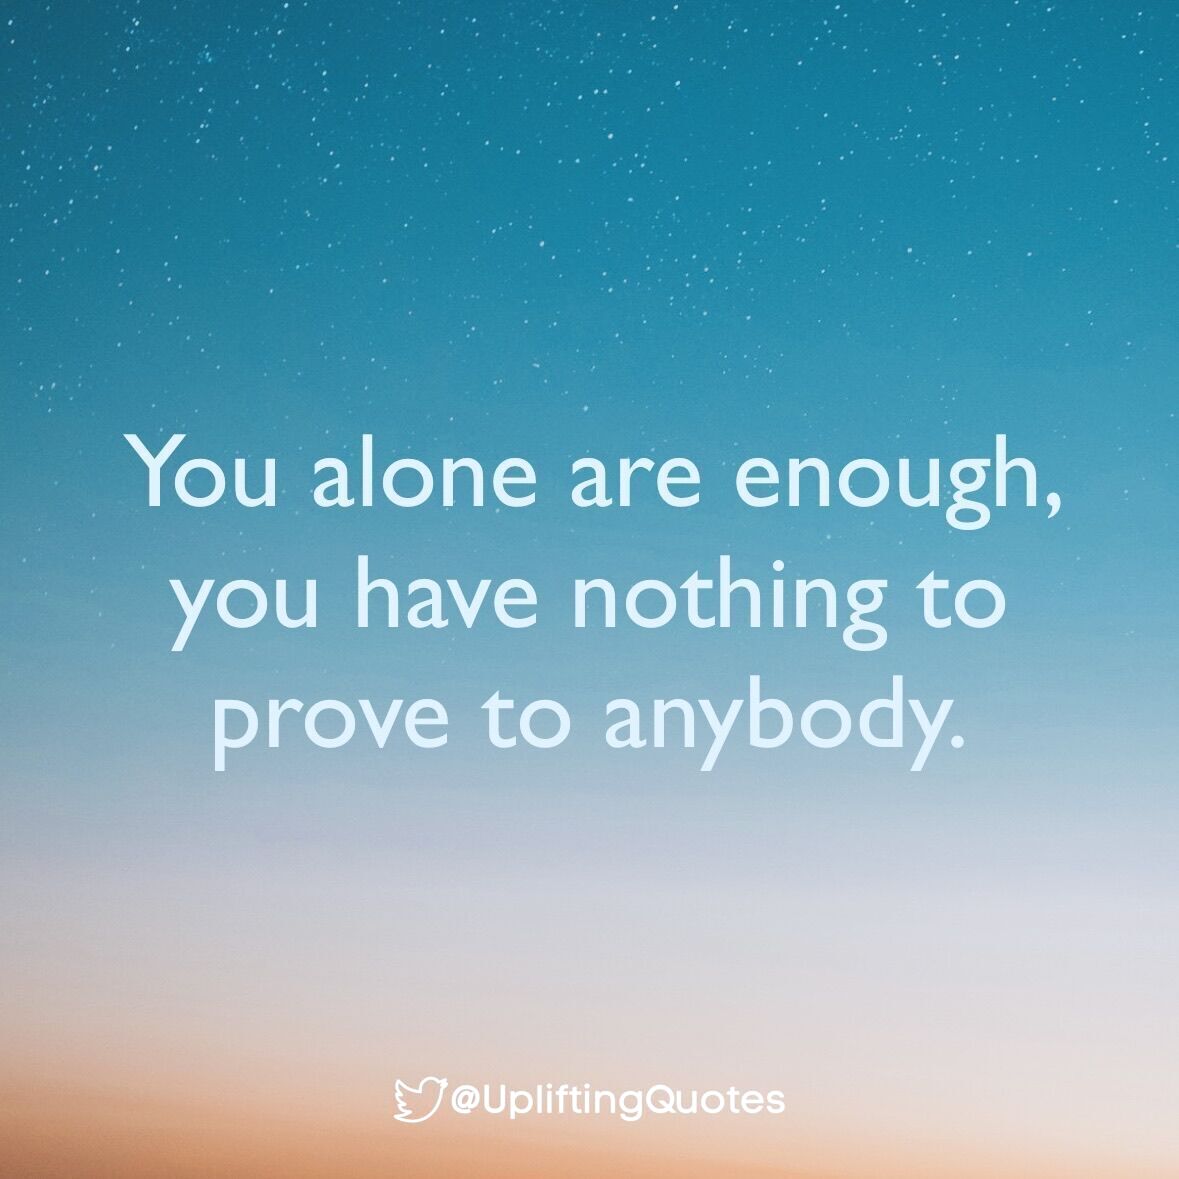 You alone are enough, you have nothing to prove to anybody. #Quotes #upliftingquotes